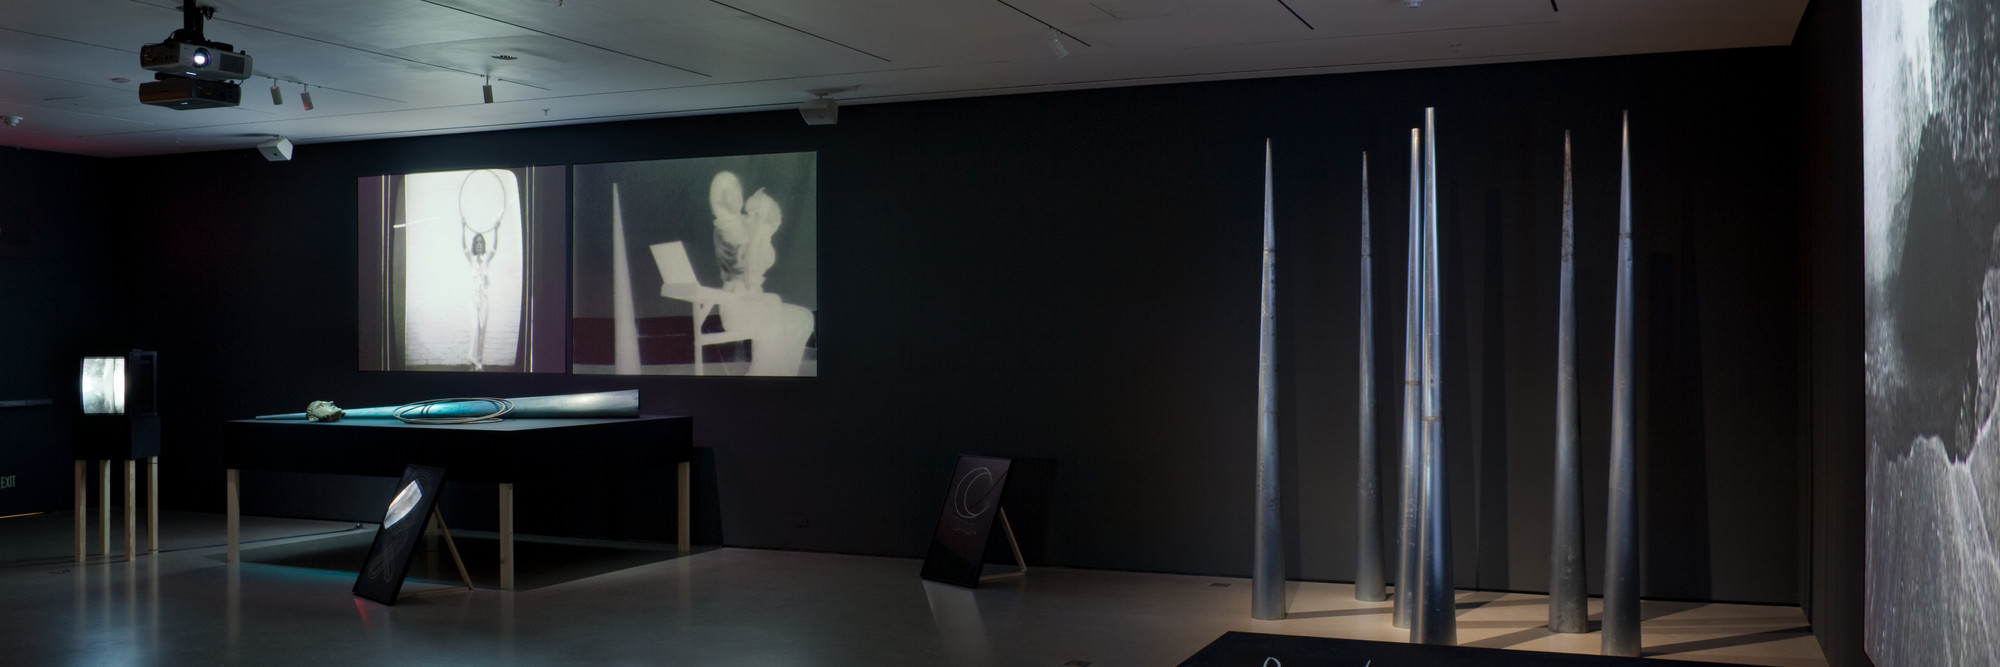 Joan Jonas. Mirage. 1976/1994/2005. Six videos (black and white, sound and silent; duration variable), props, stages, and photographs, dimensions variable. Gift of Richard J. Massey, Clarissa Alcock Bronfman, Agnes Gund, and Committee on Media Funds. © 2019 Joan Jonas